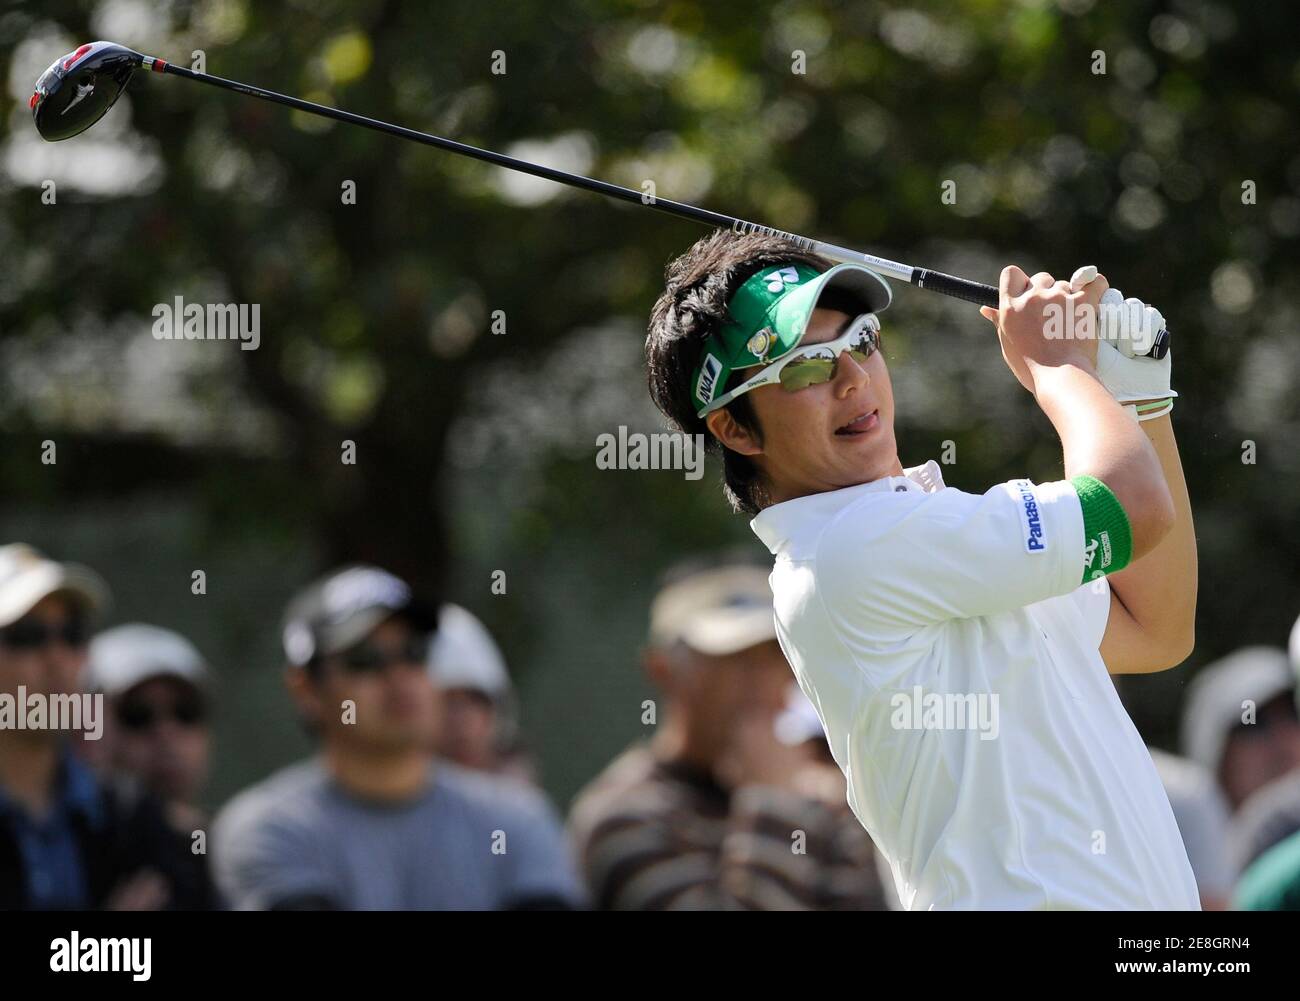 Ryo Ishikawa of Japan, 17, reacts to his drive on the eleventh whole during the second round of the Northern Trust Open golf tournament in the Pacific Palisades area of Los Angeles February 20, 2009. REUTERS/Gus Ruelas (UNITED STATES) Stock Photo